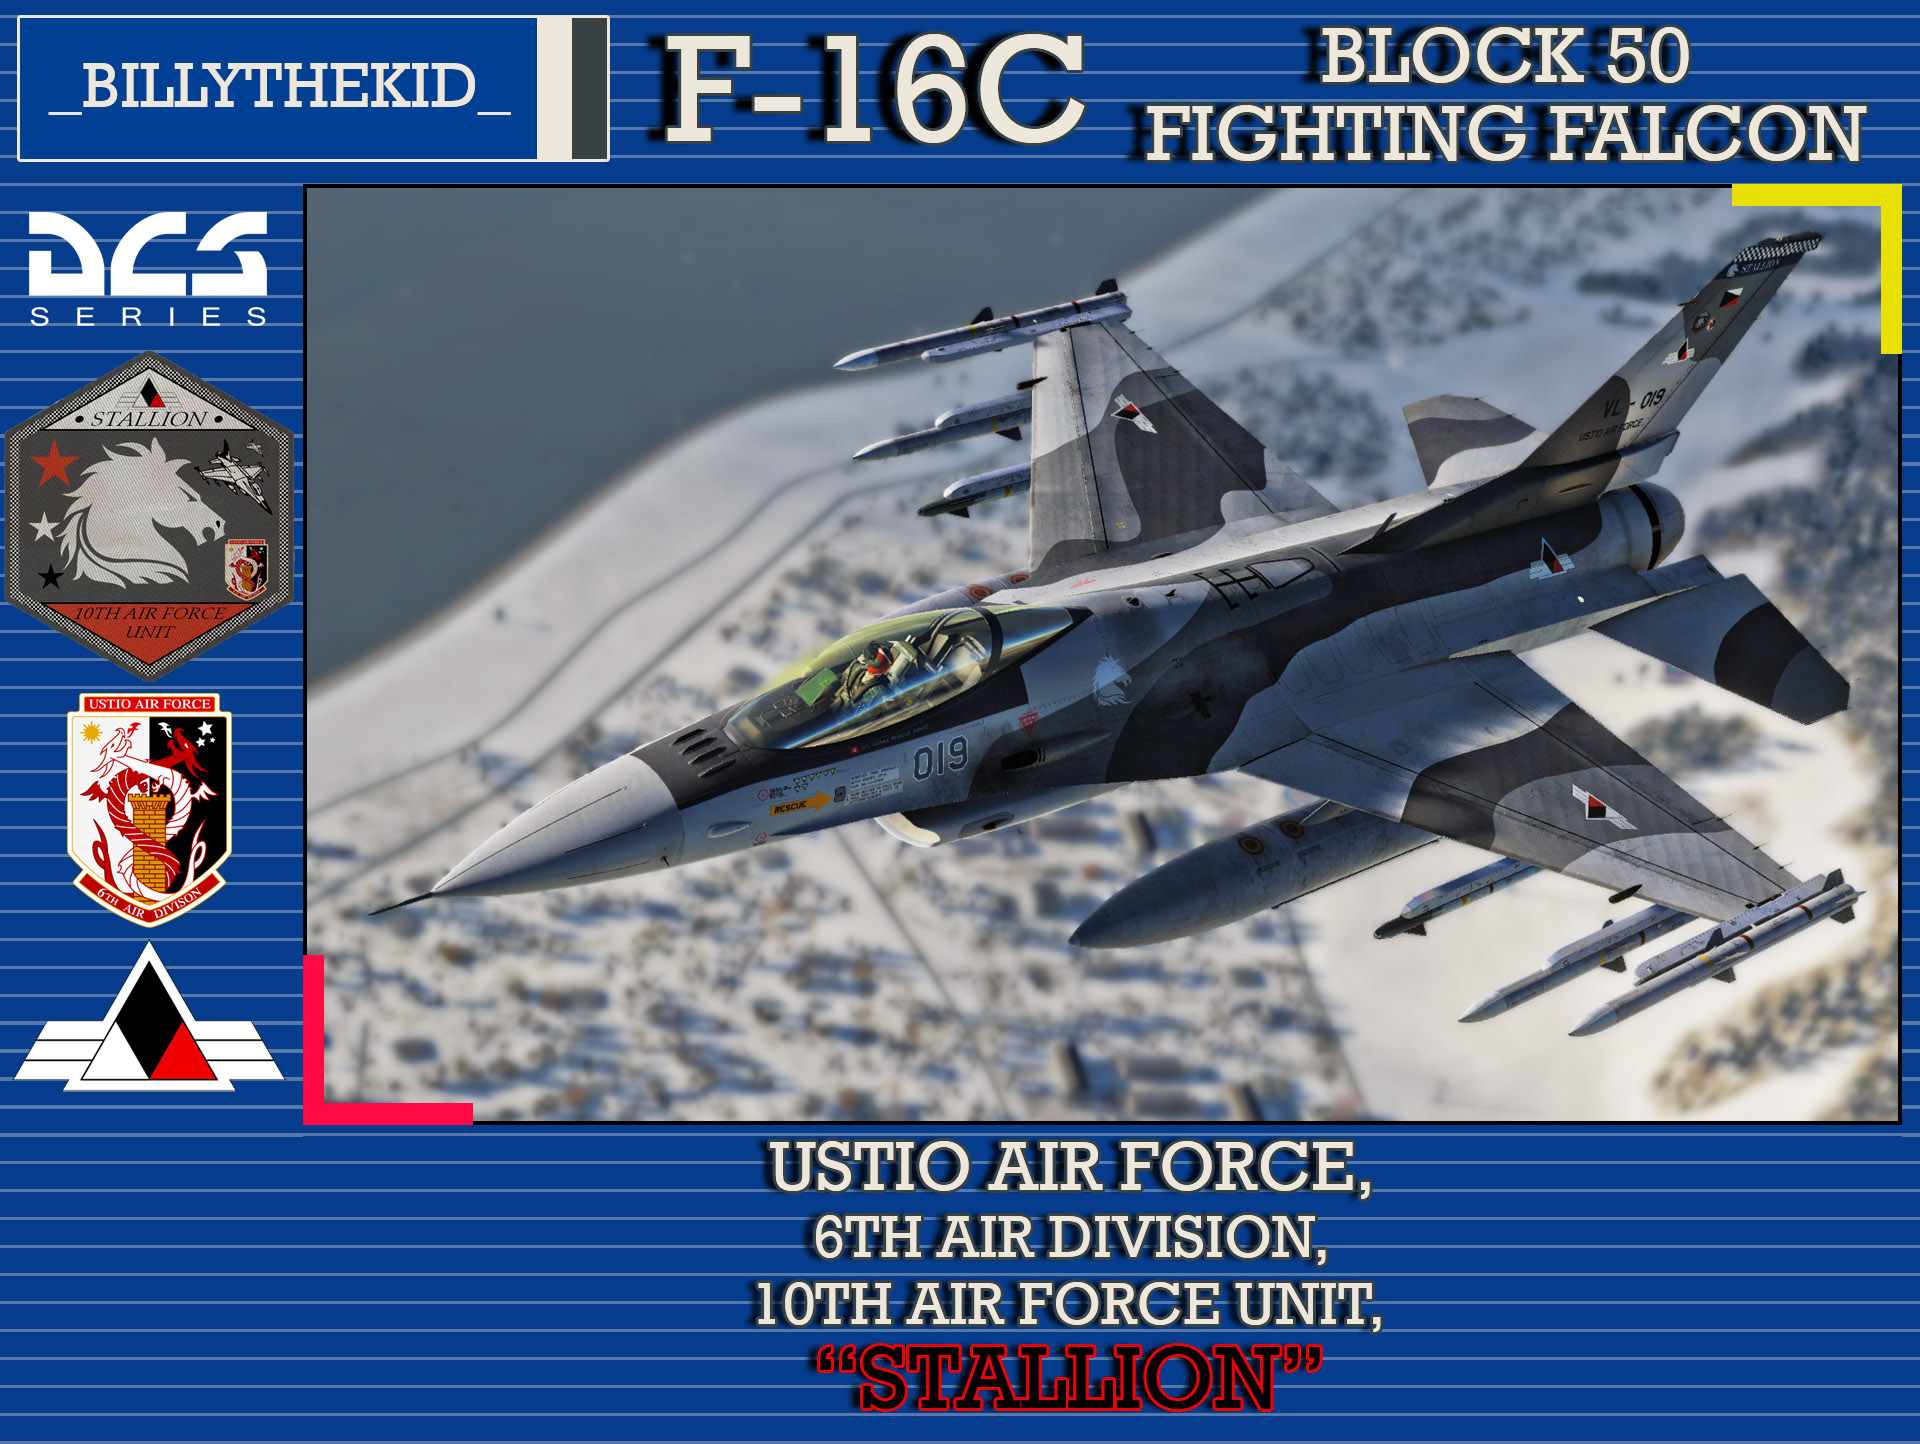 Ace Combat - Ustio Air Force, 6th Air Division - 10th Air Force Unit "Stallion" F-16C Block 50 Fighting Falcon